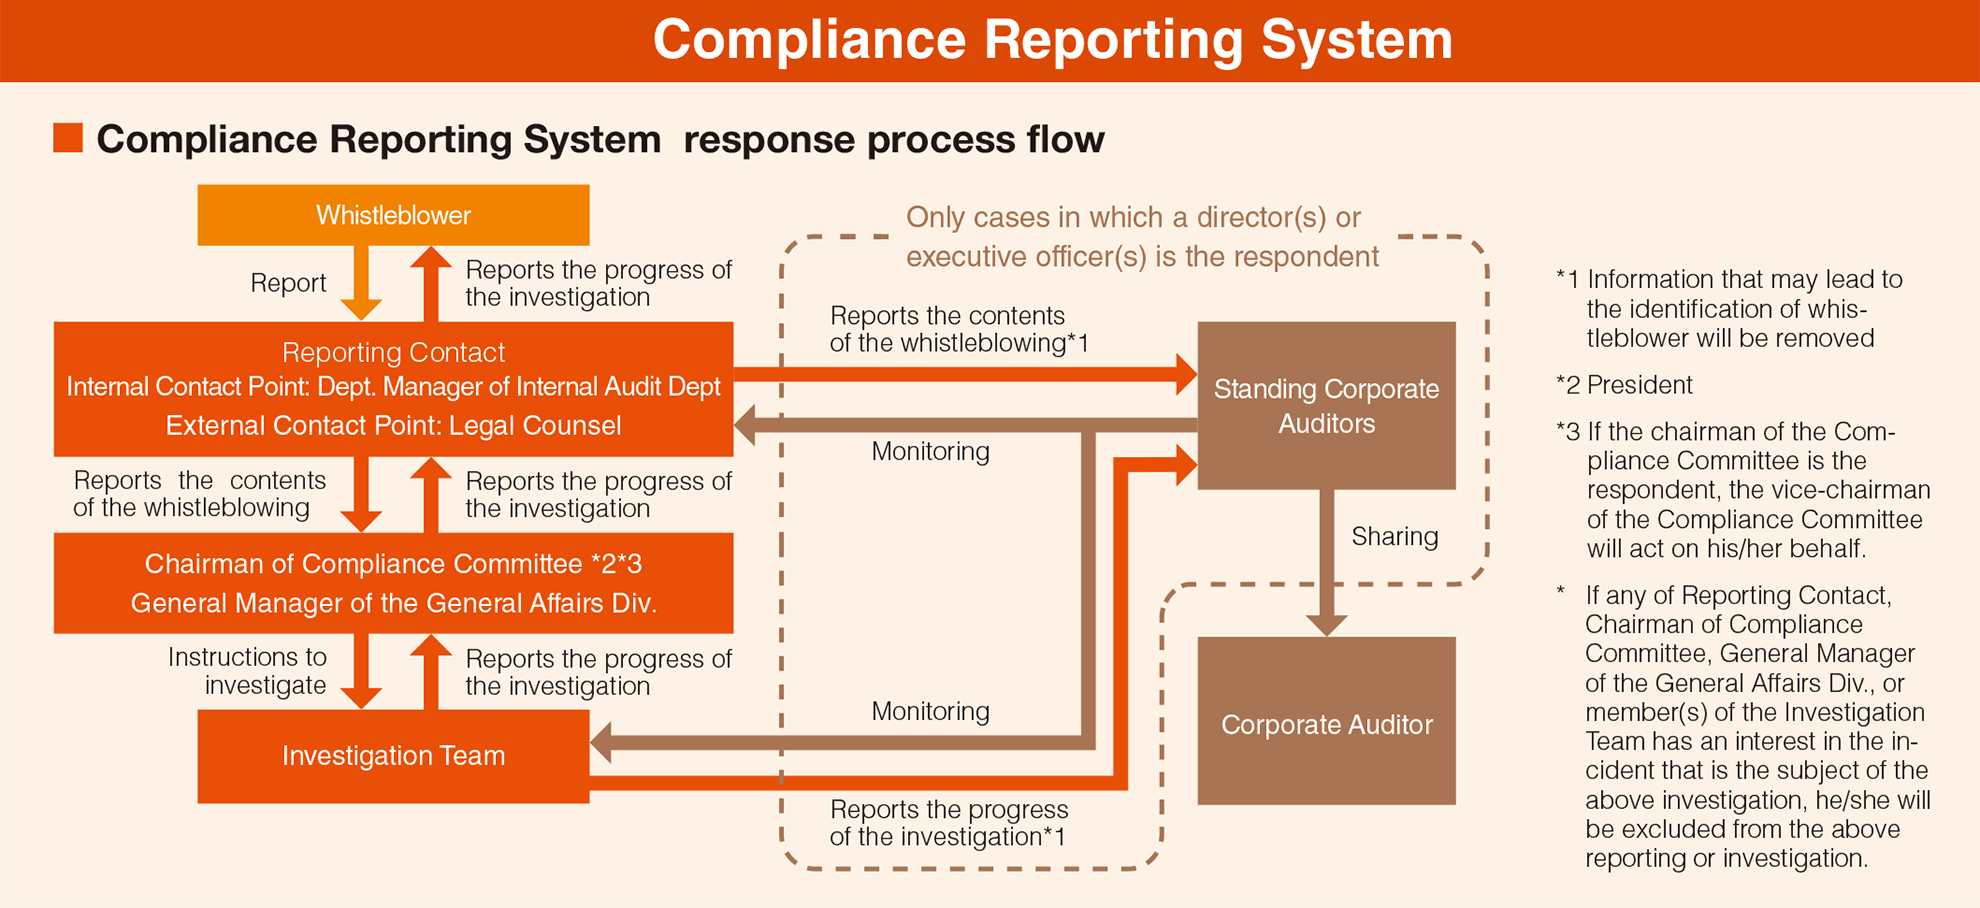 Compriance Reporting System response process flow